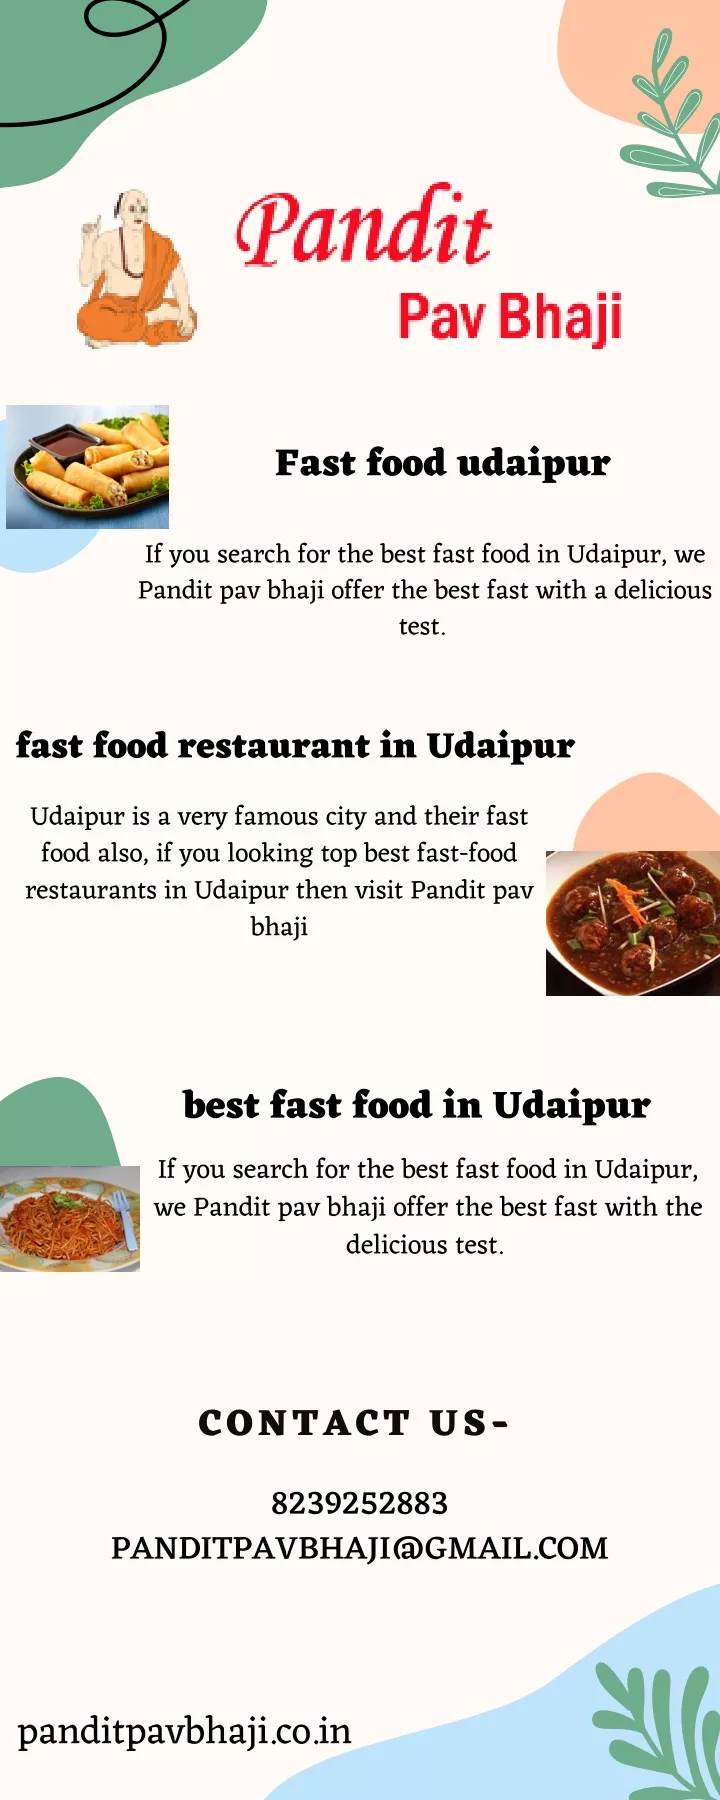 fast food udaipur if you search for the best fast